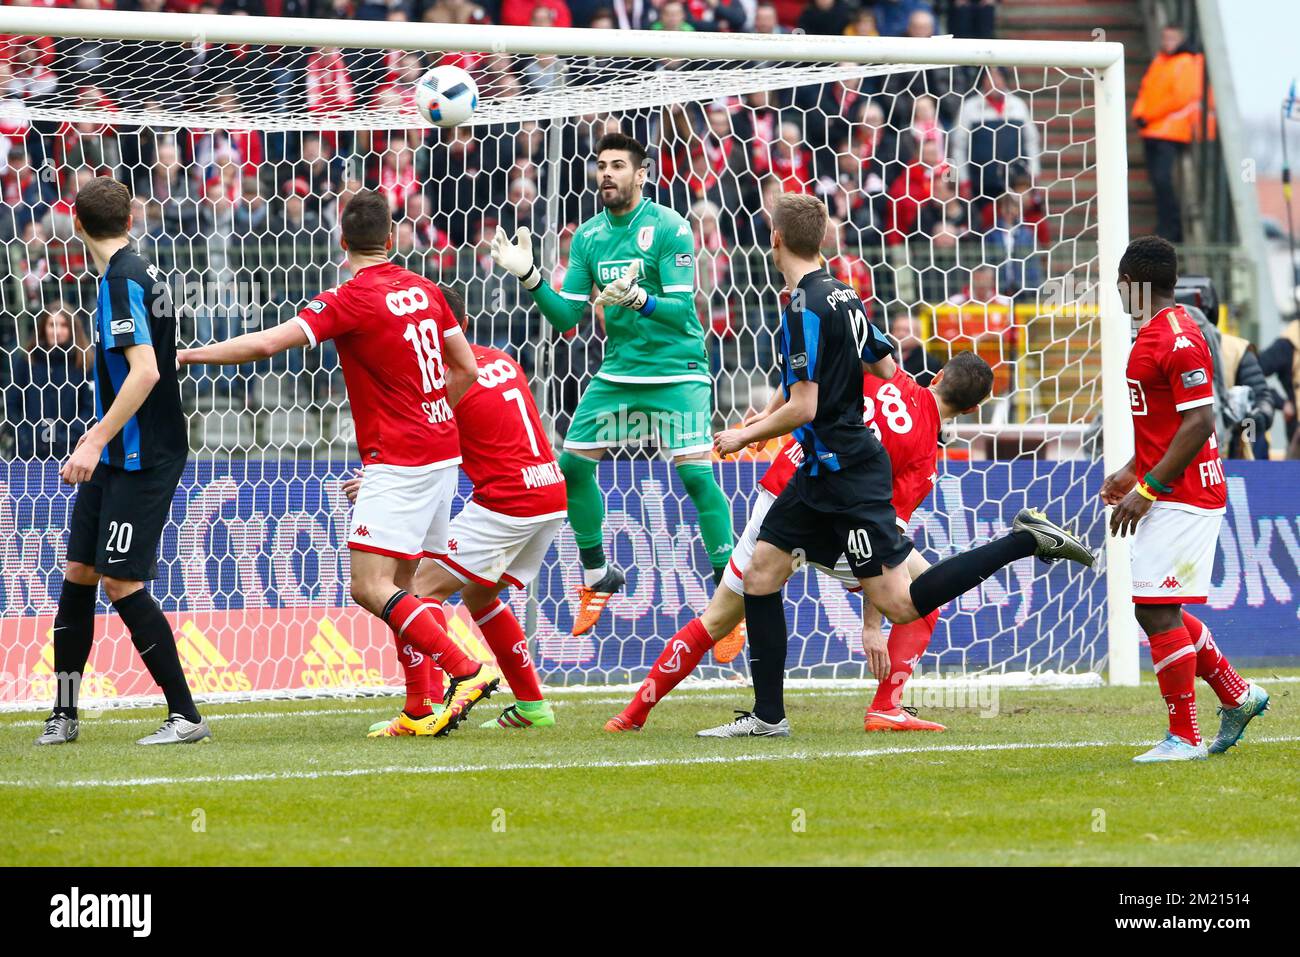 Standard's goalkeeper Victor Valdes Arriba fights for the ball during the Croky Cup final between Belgian soccer teams Club Brugge and Standard de Liege, on Sunday 20 March 2016, in Brussels.  Stock Photo